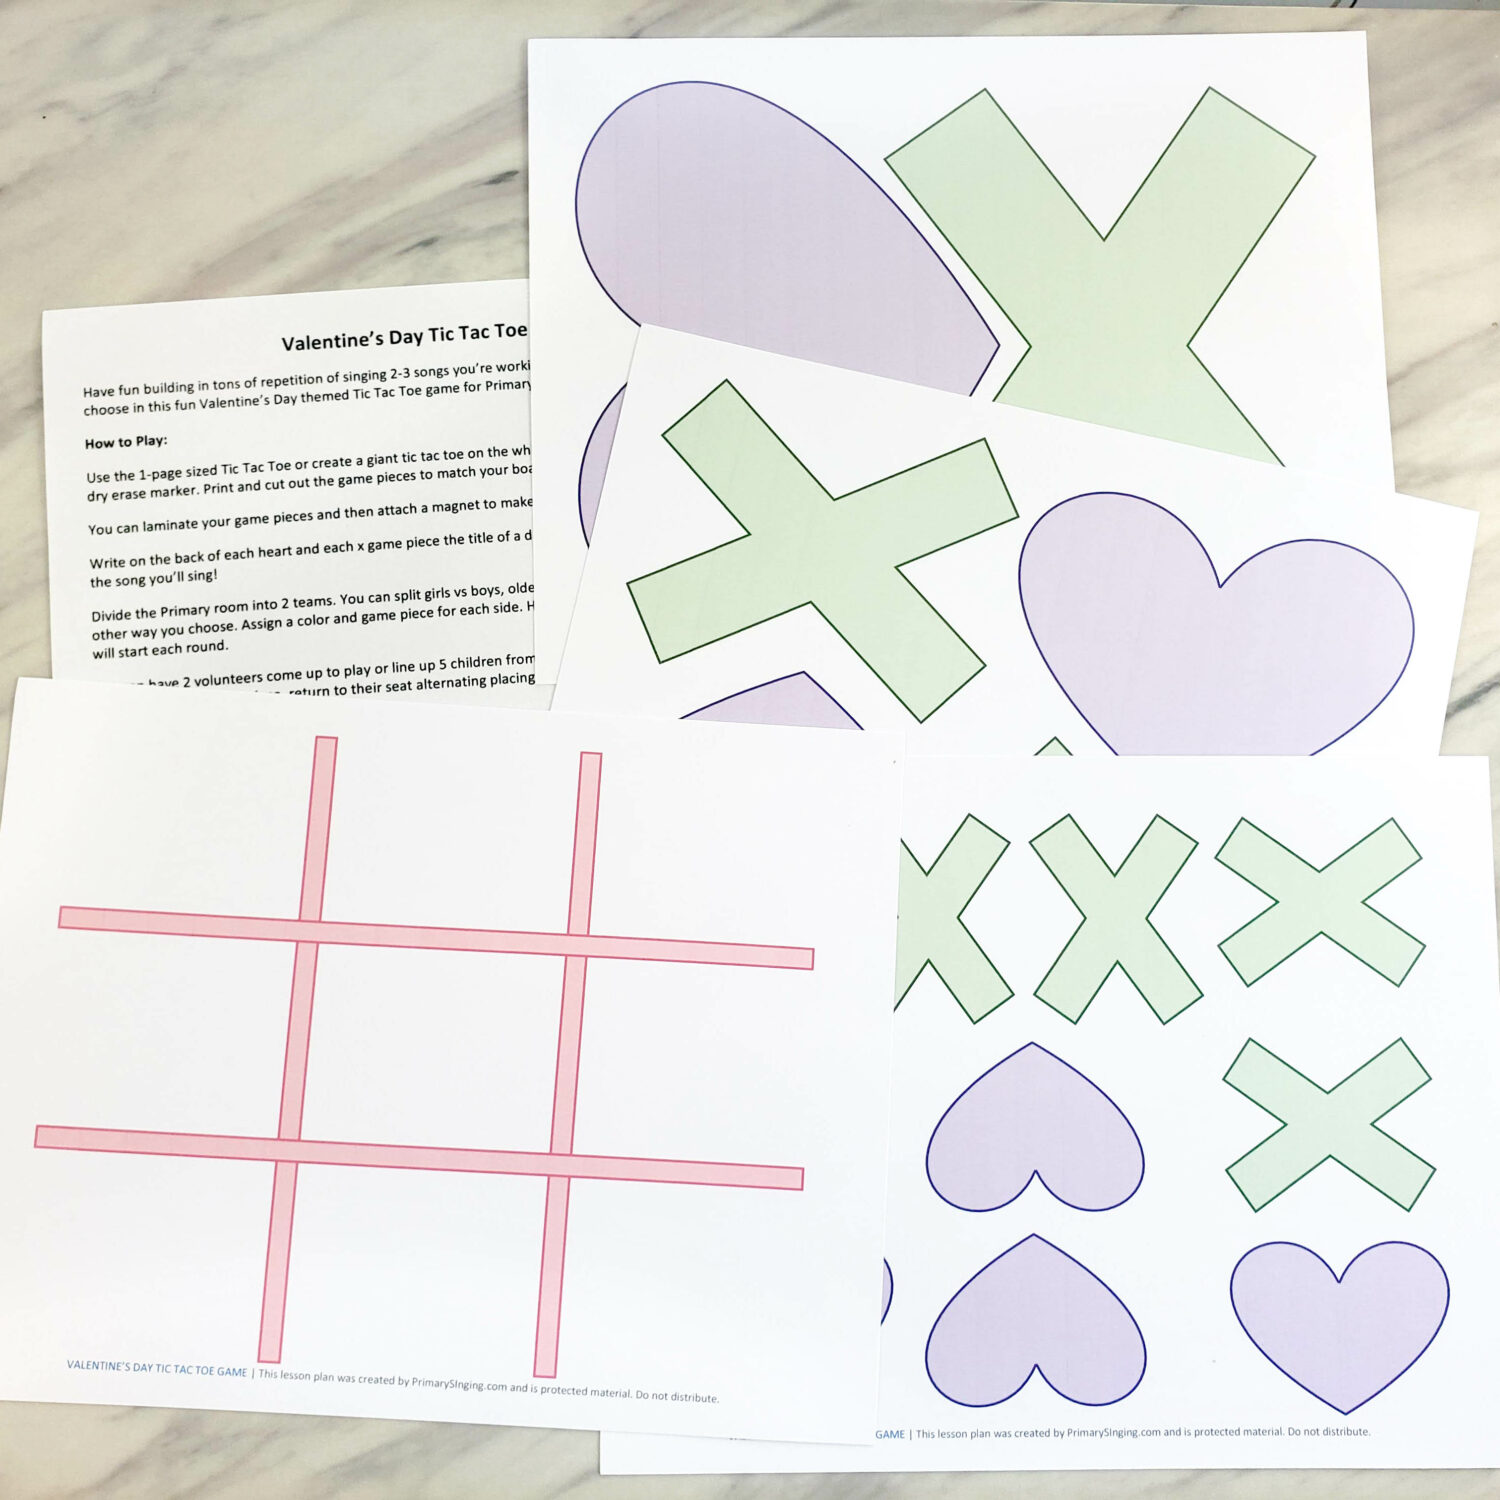 Shop: Valentine's Day Tic Tac Toe & Love Notes Easy ideas for Music Leaders Valentines Day Tic Tac Toe 20220209 105245